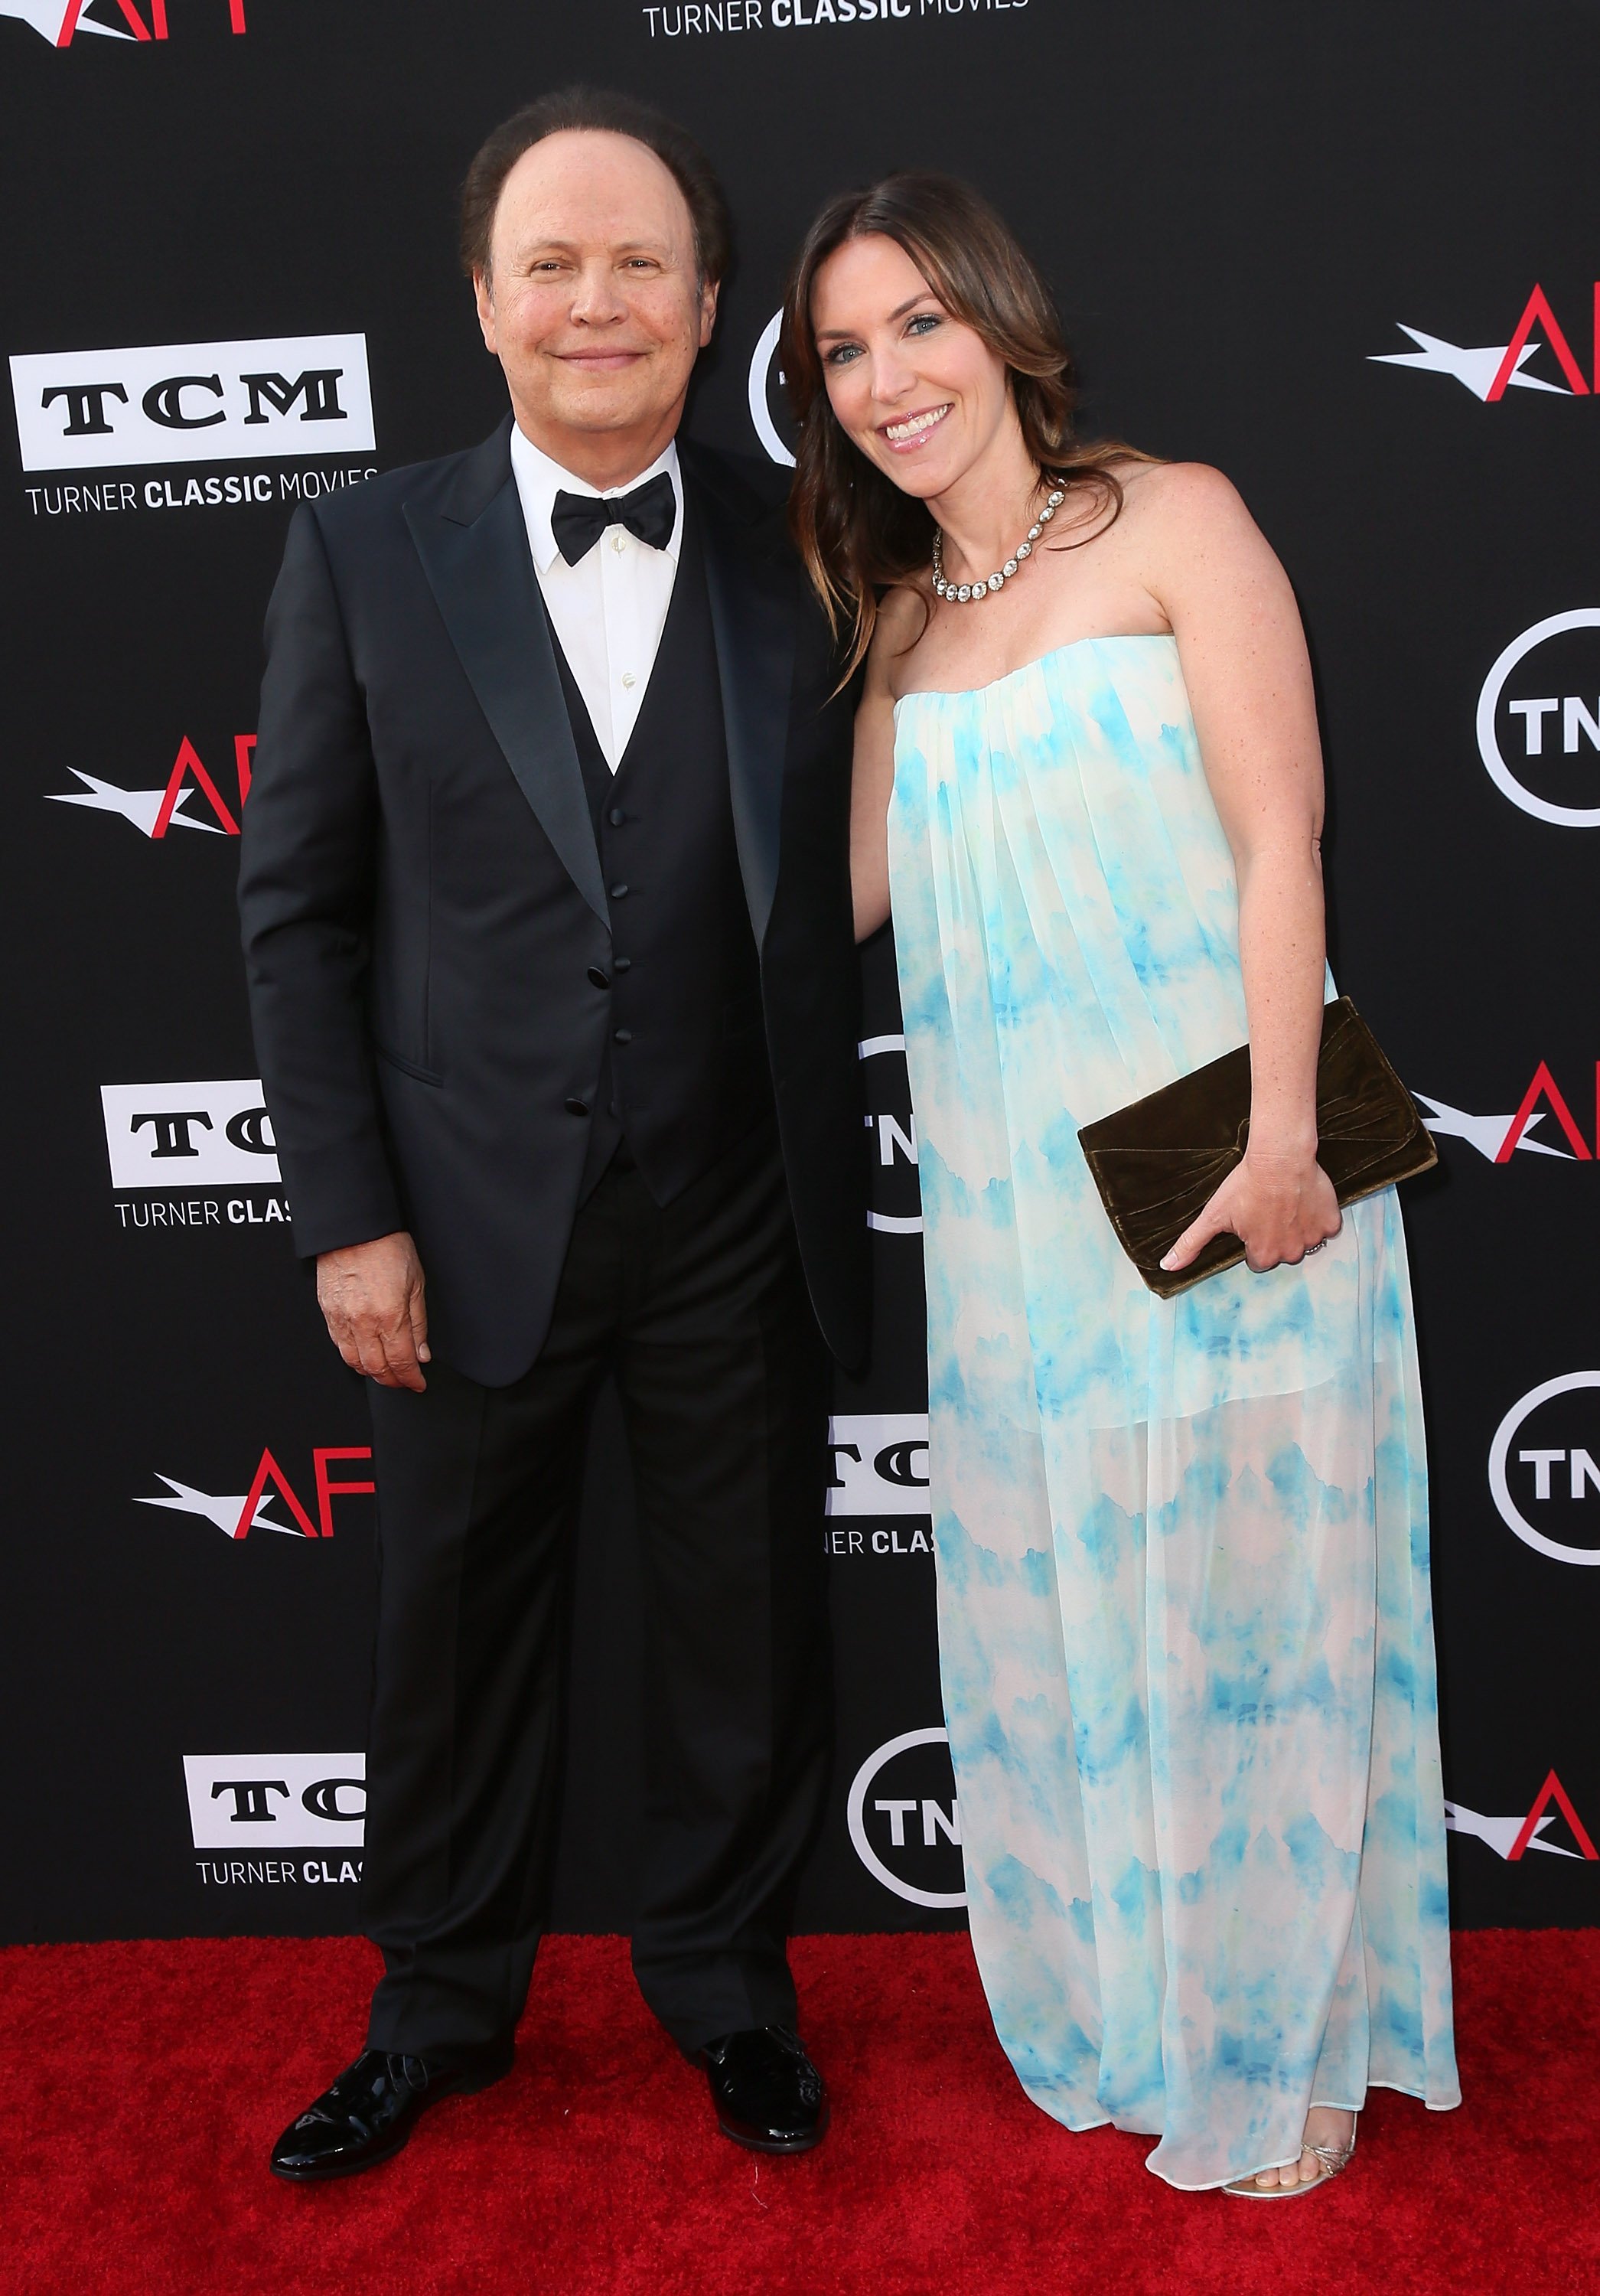 Billy Crystal and daughter, Jennifer Crystal, on June 6, 2013 in Hollywood, California | Source: Getty Images